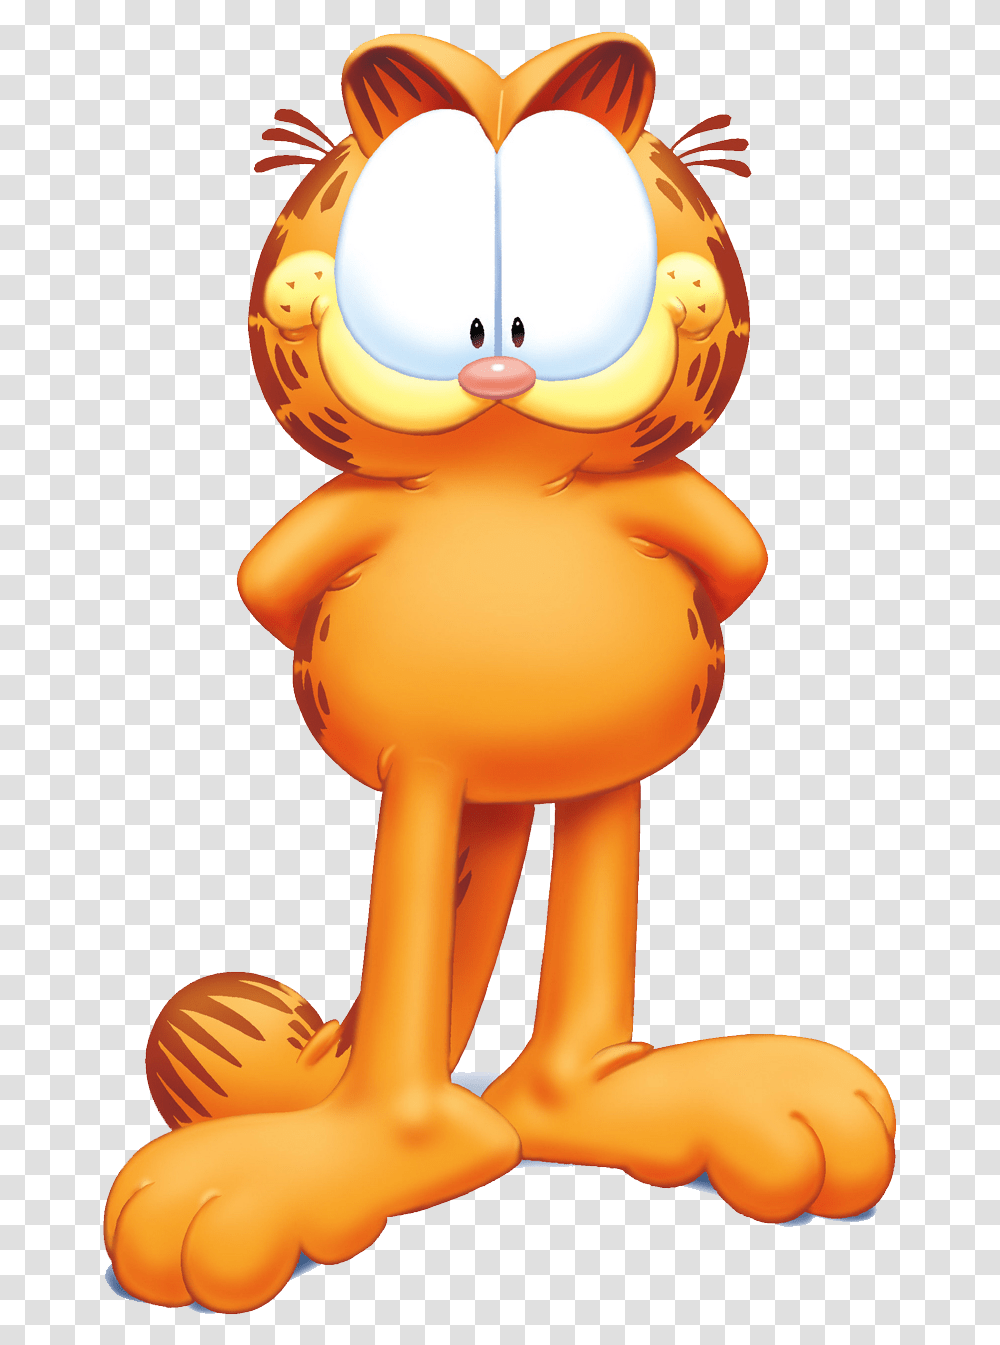 Garfield Image Care About You My Friend, Toy, Animal Transparent Png